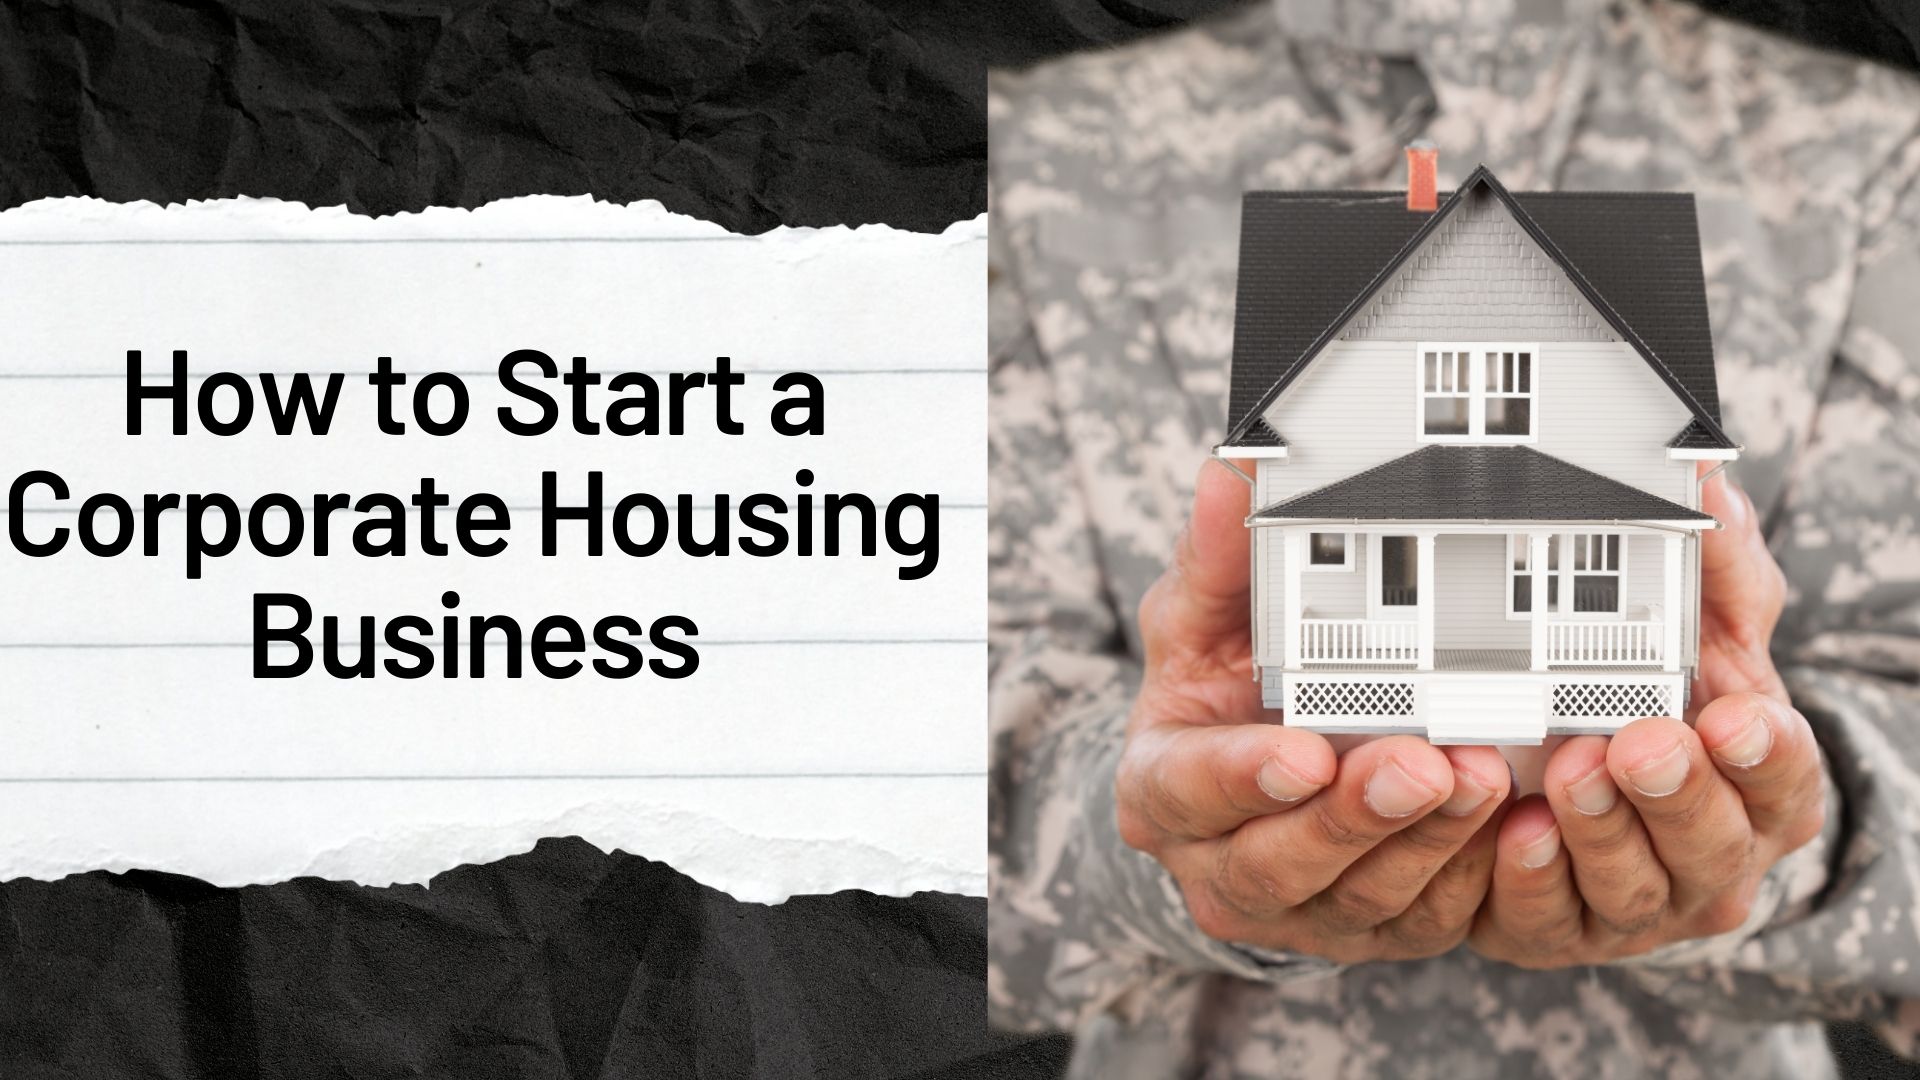 How to Start a Corporate Housing Business